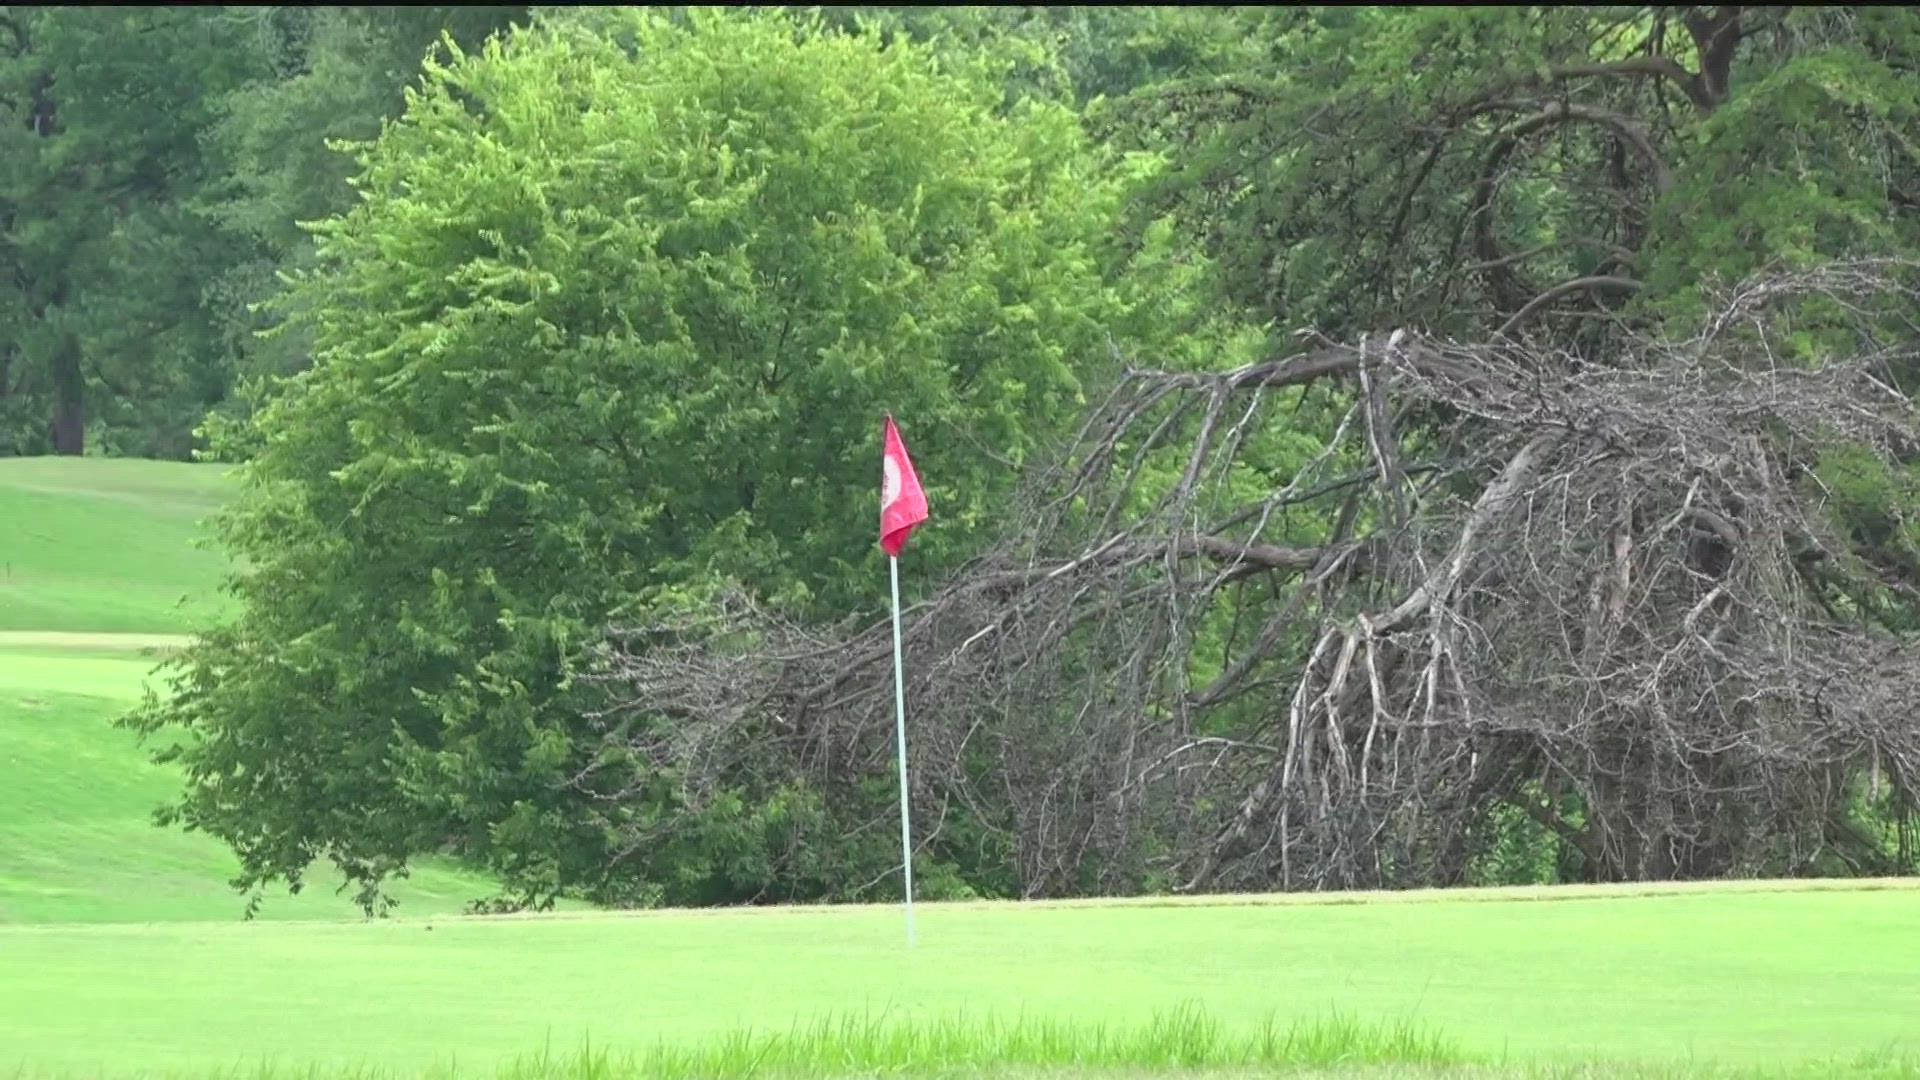 Overgrown and unkempt, golfers say it's been tough to play.